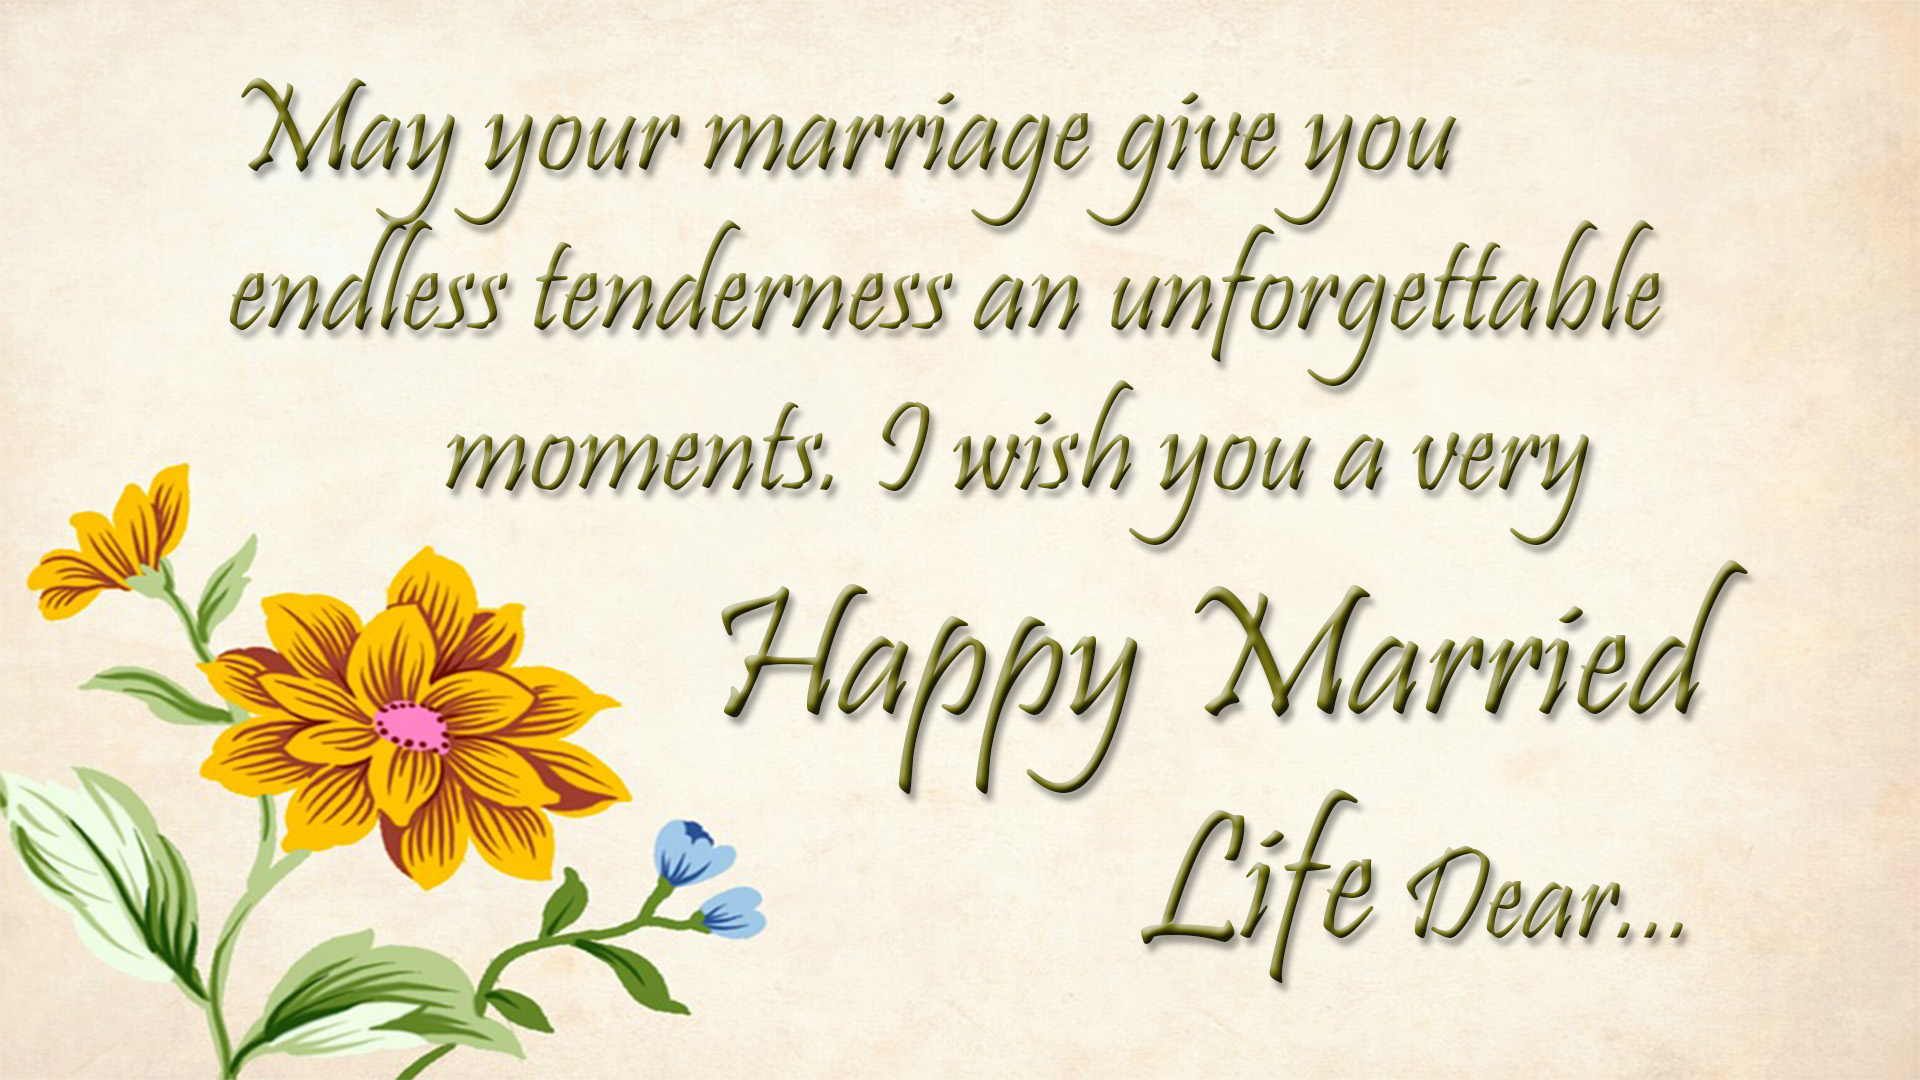 Happy marriage wishes 2018